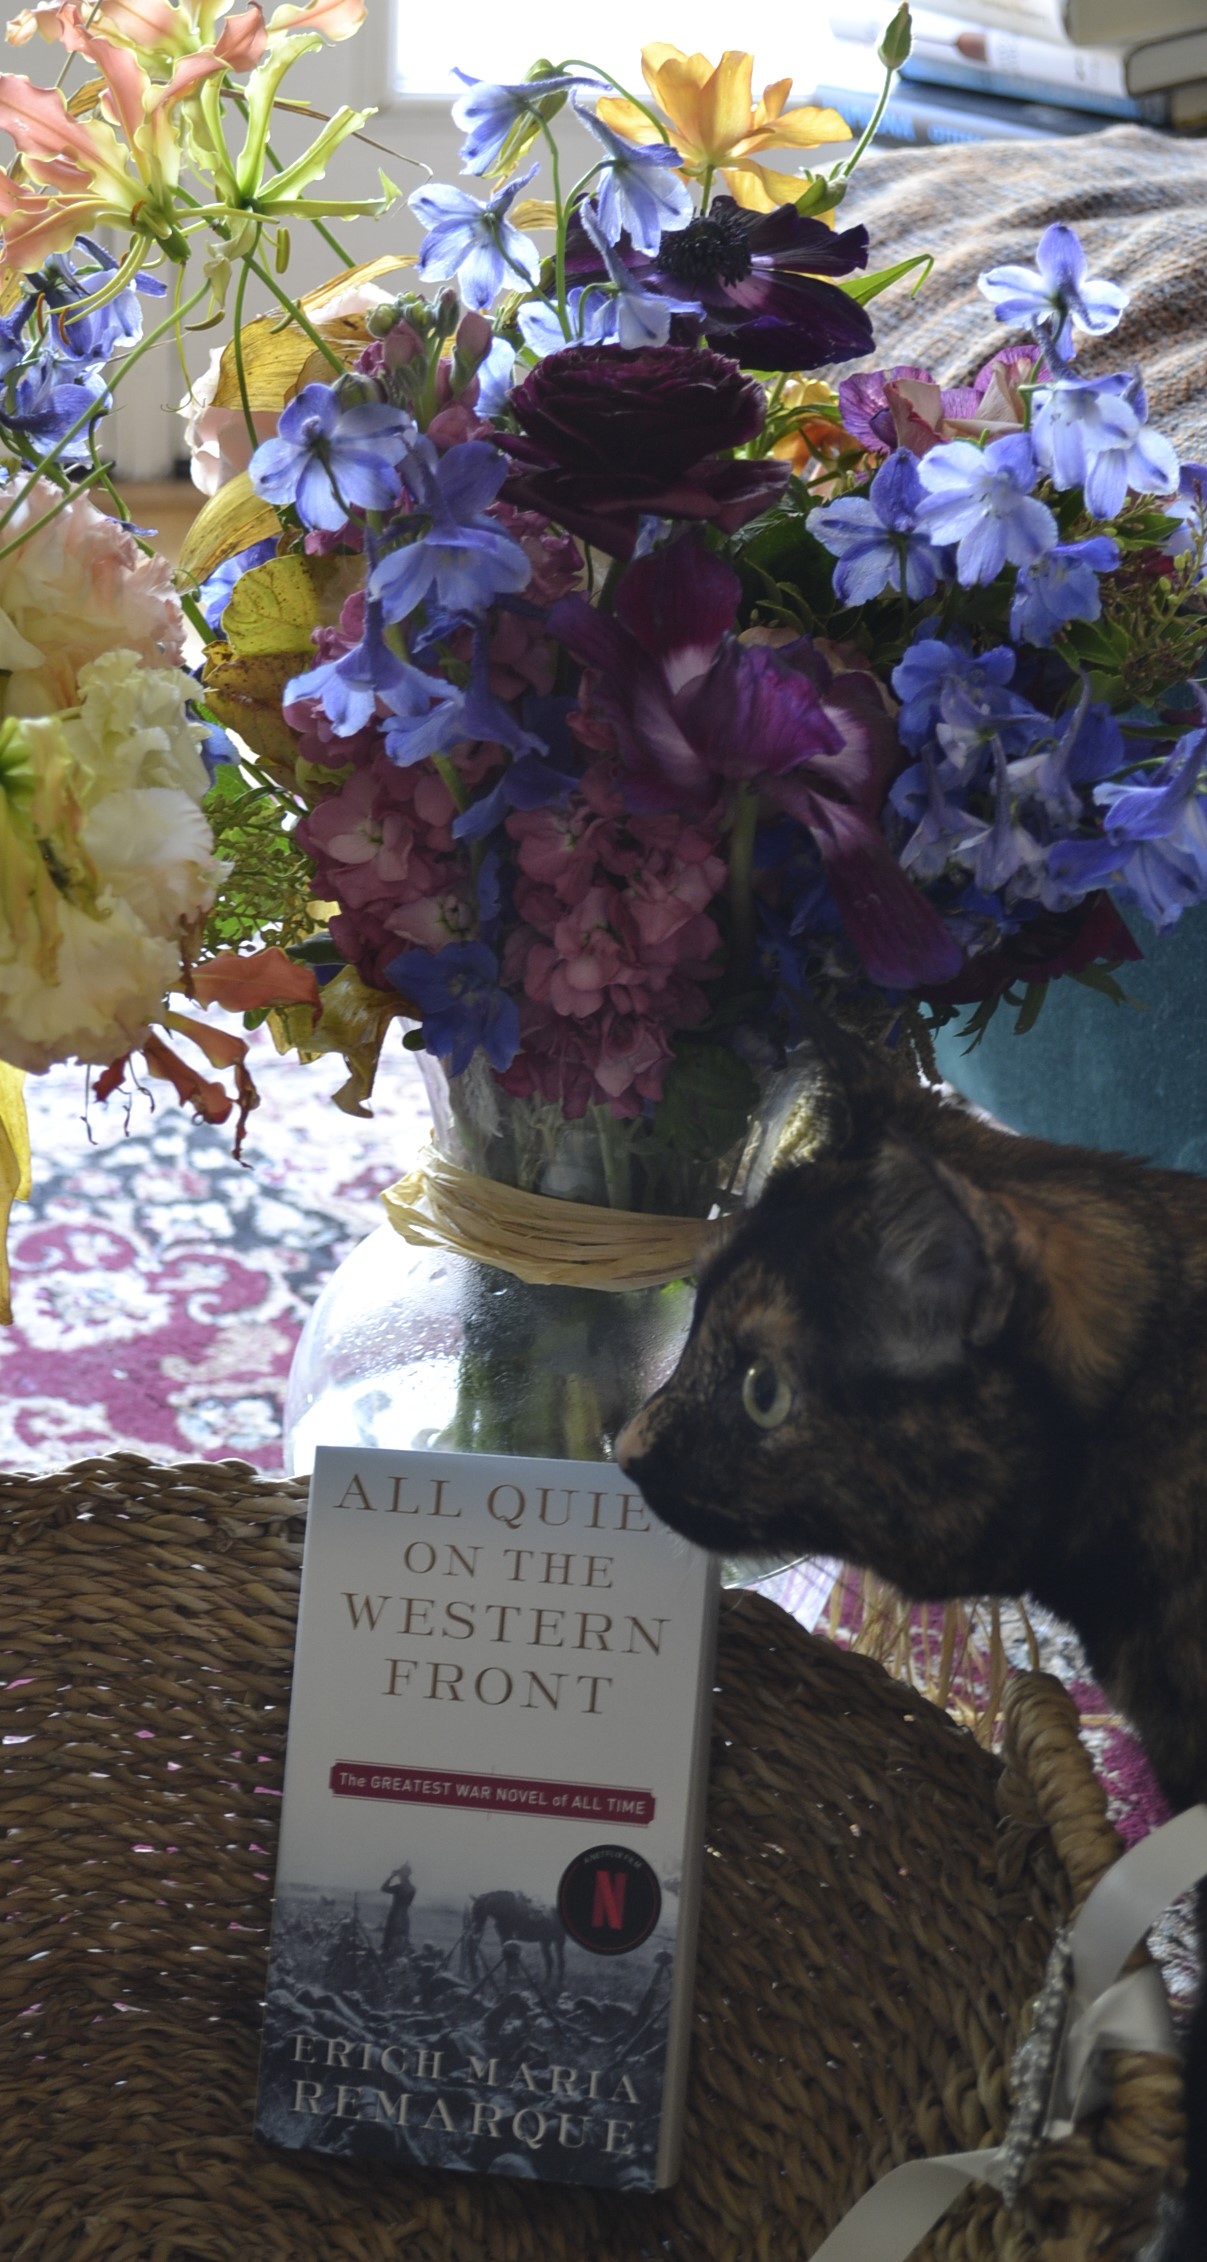 A tortie stands beneath some flowers with a copy of All Quiet on the Western Front.